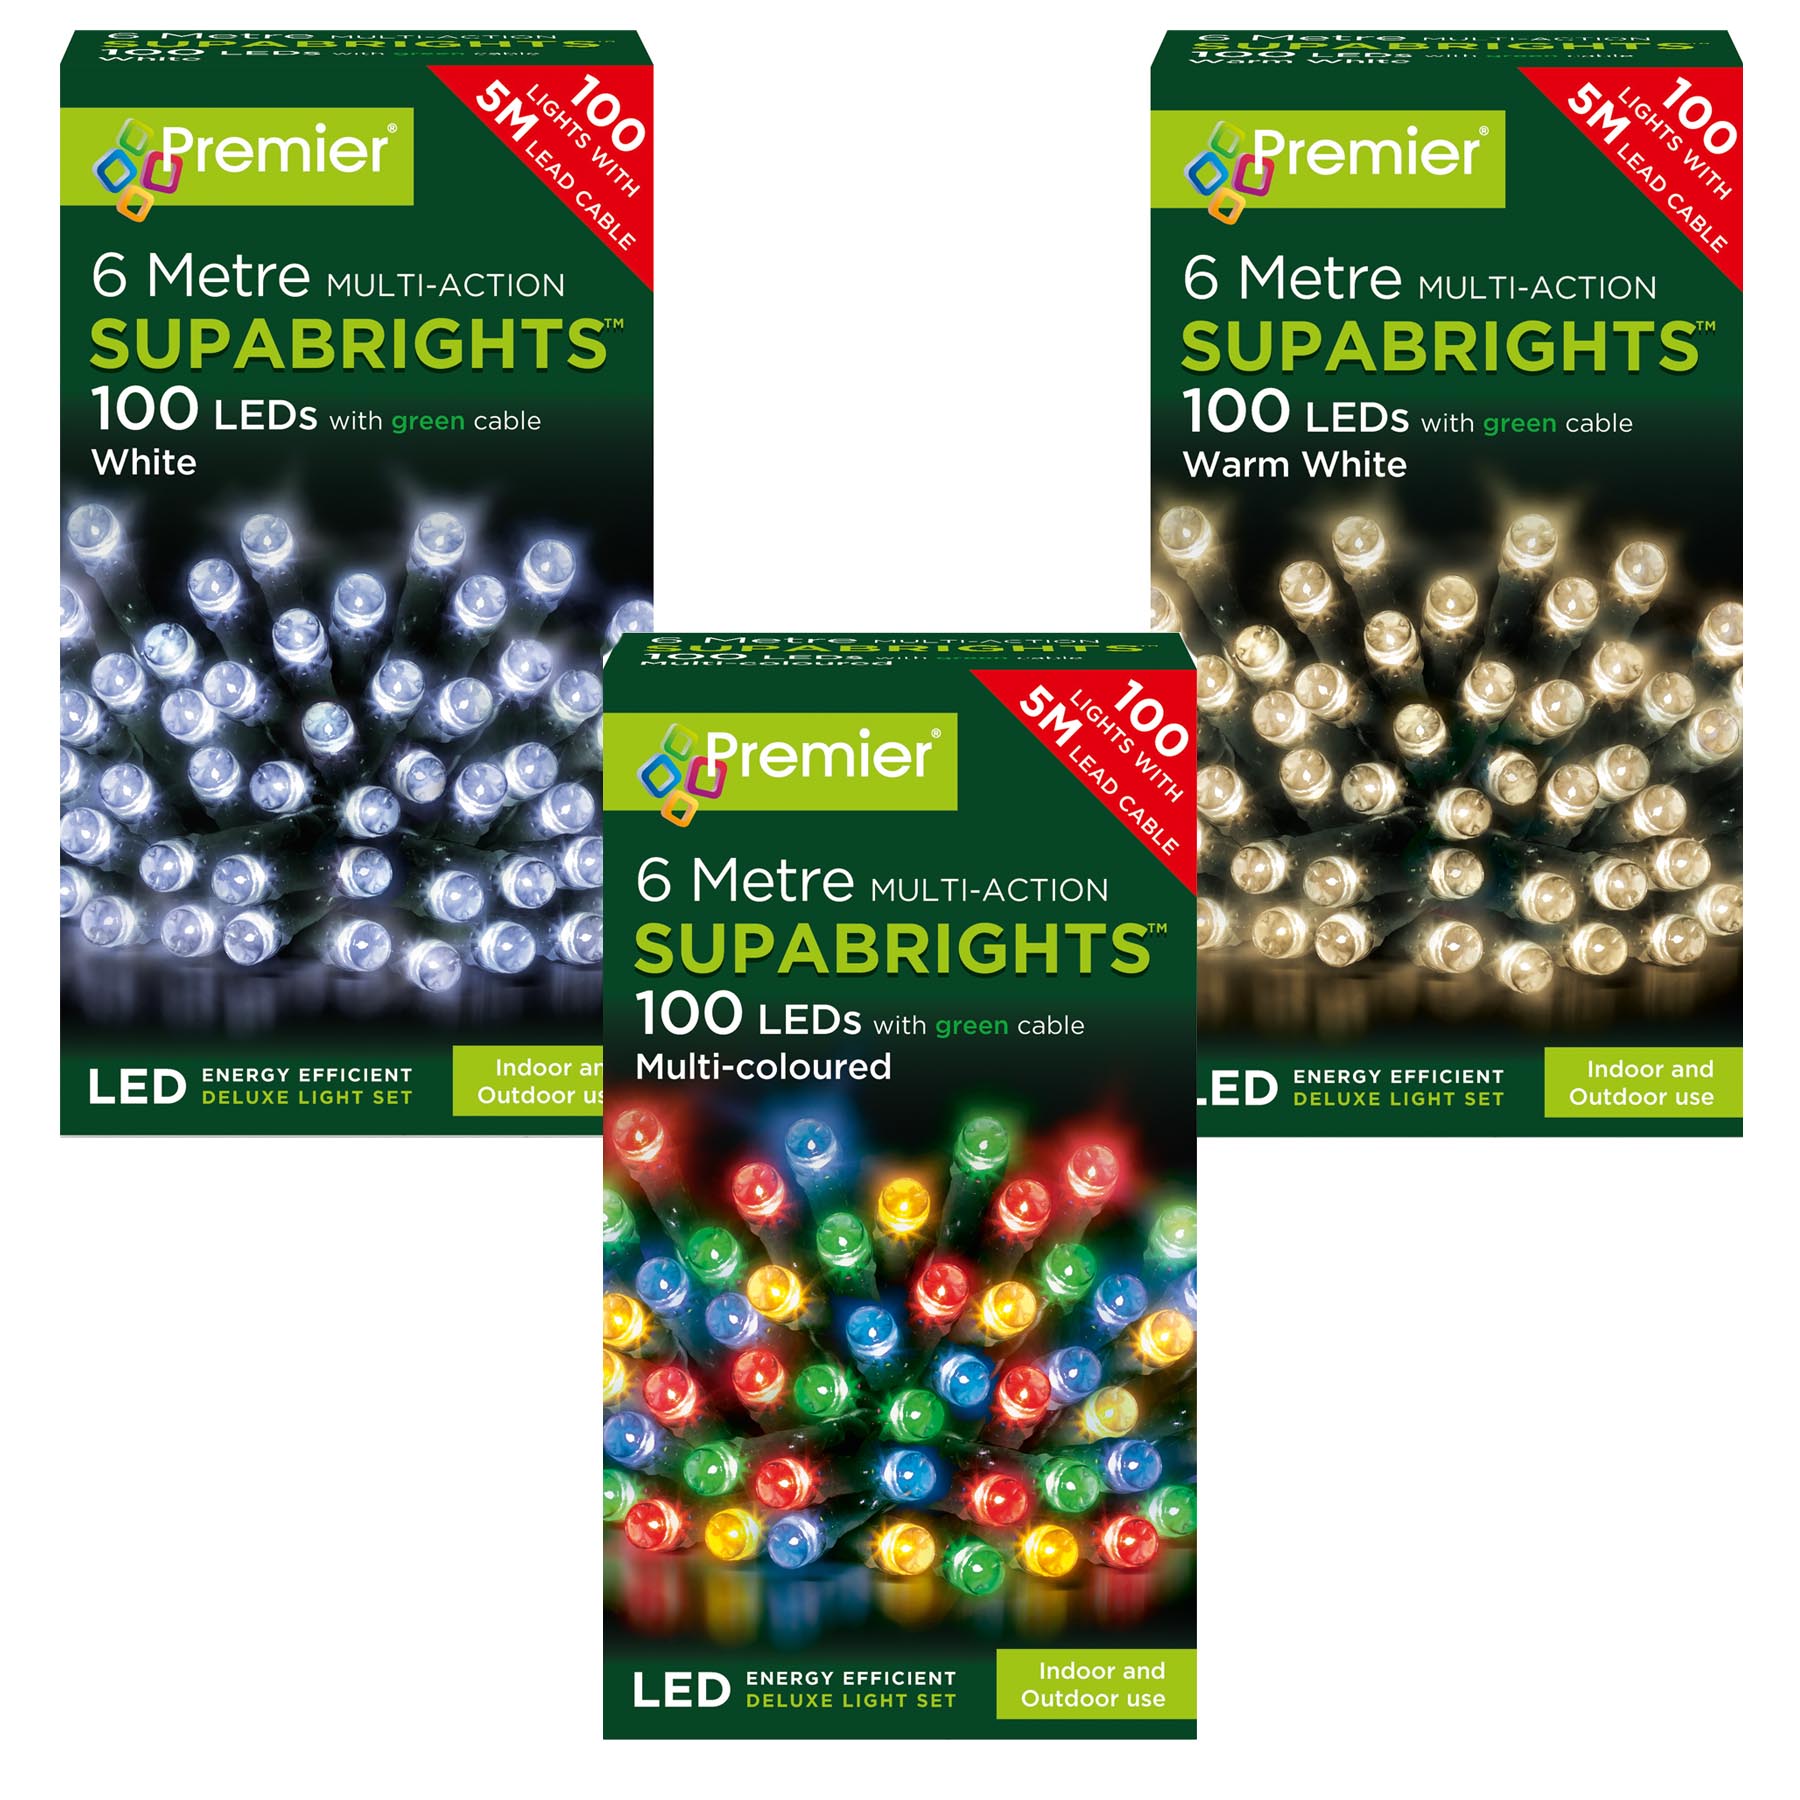 100 Multi-action Supabrights Lights - Available in 3 Colours